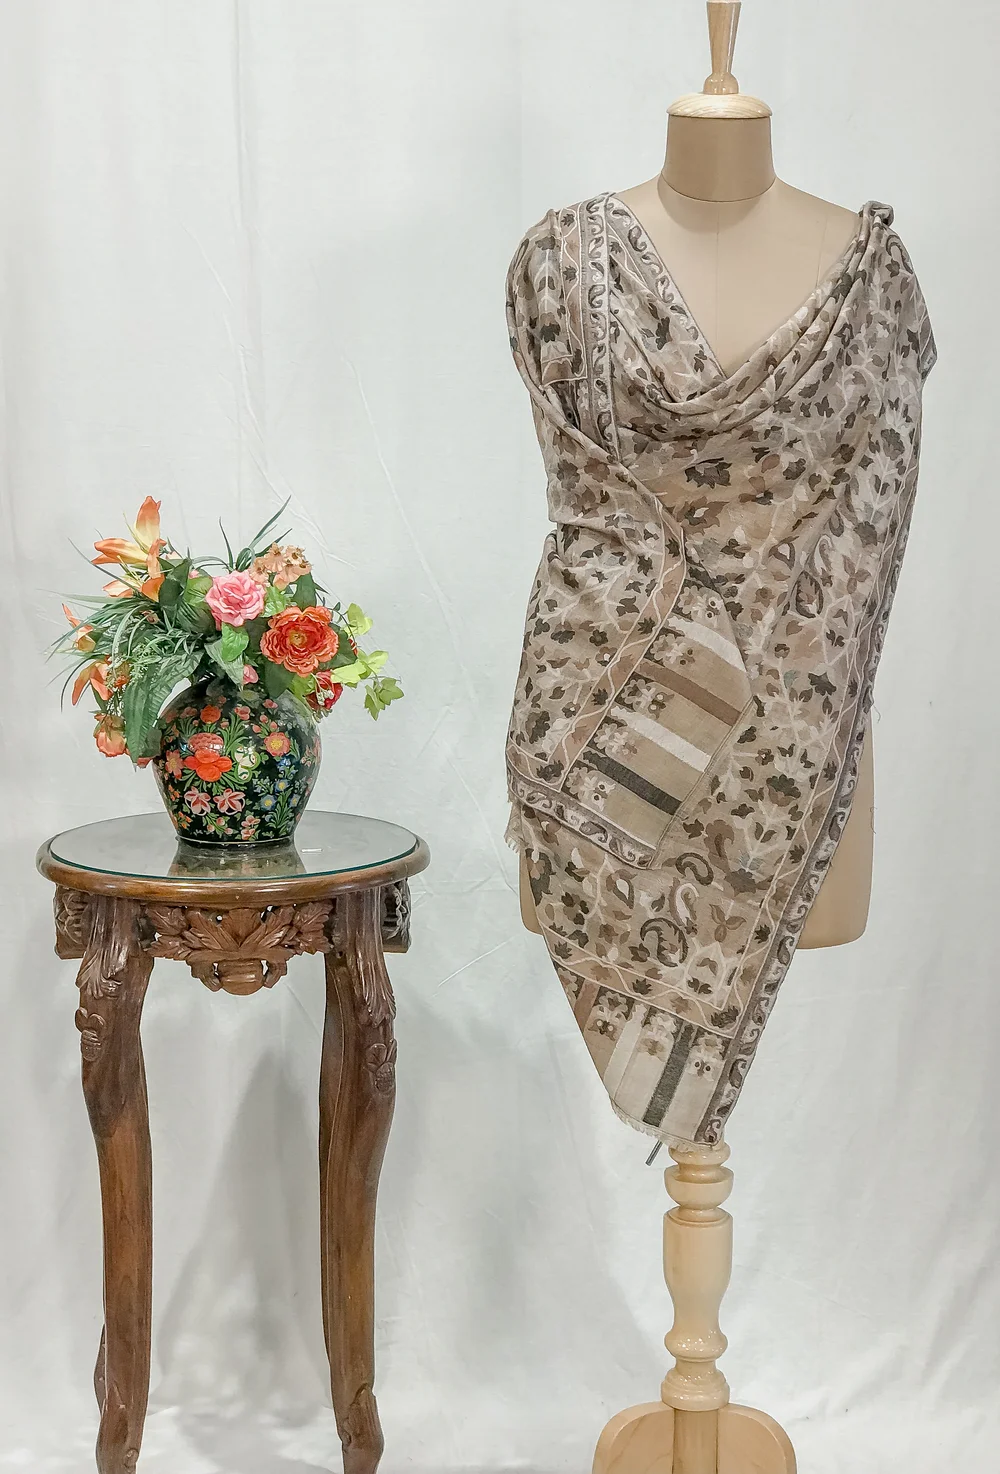 Natural Pashmina Stoles: Shades of Black, White and Brown